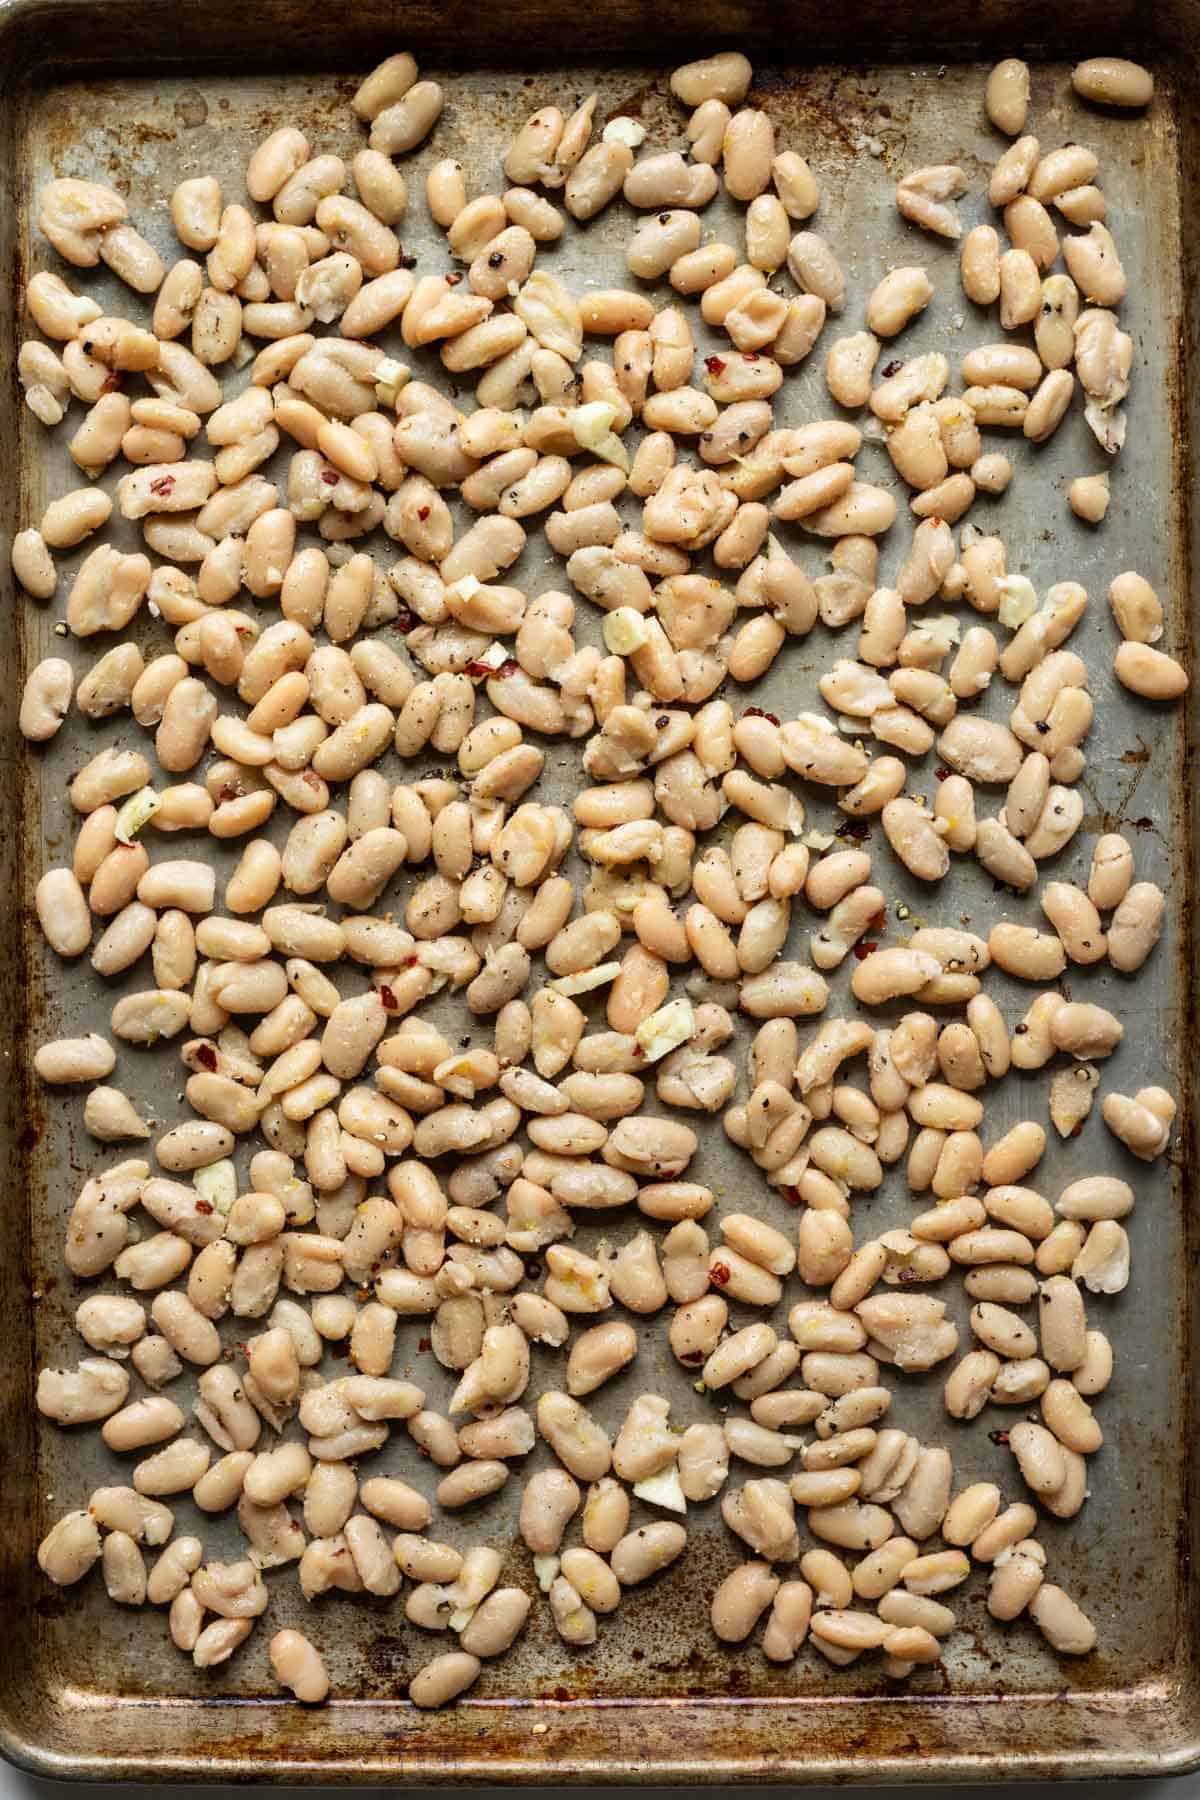 Cooked white beans seasoned with garlic and salt, spread out on a pan and ready to be roasted.